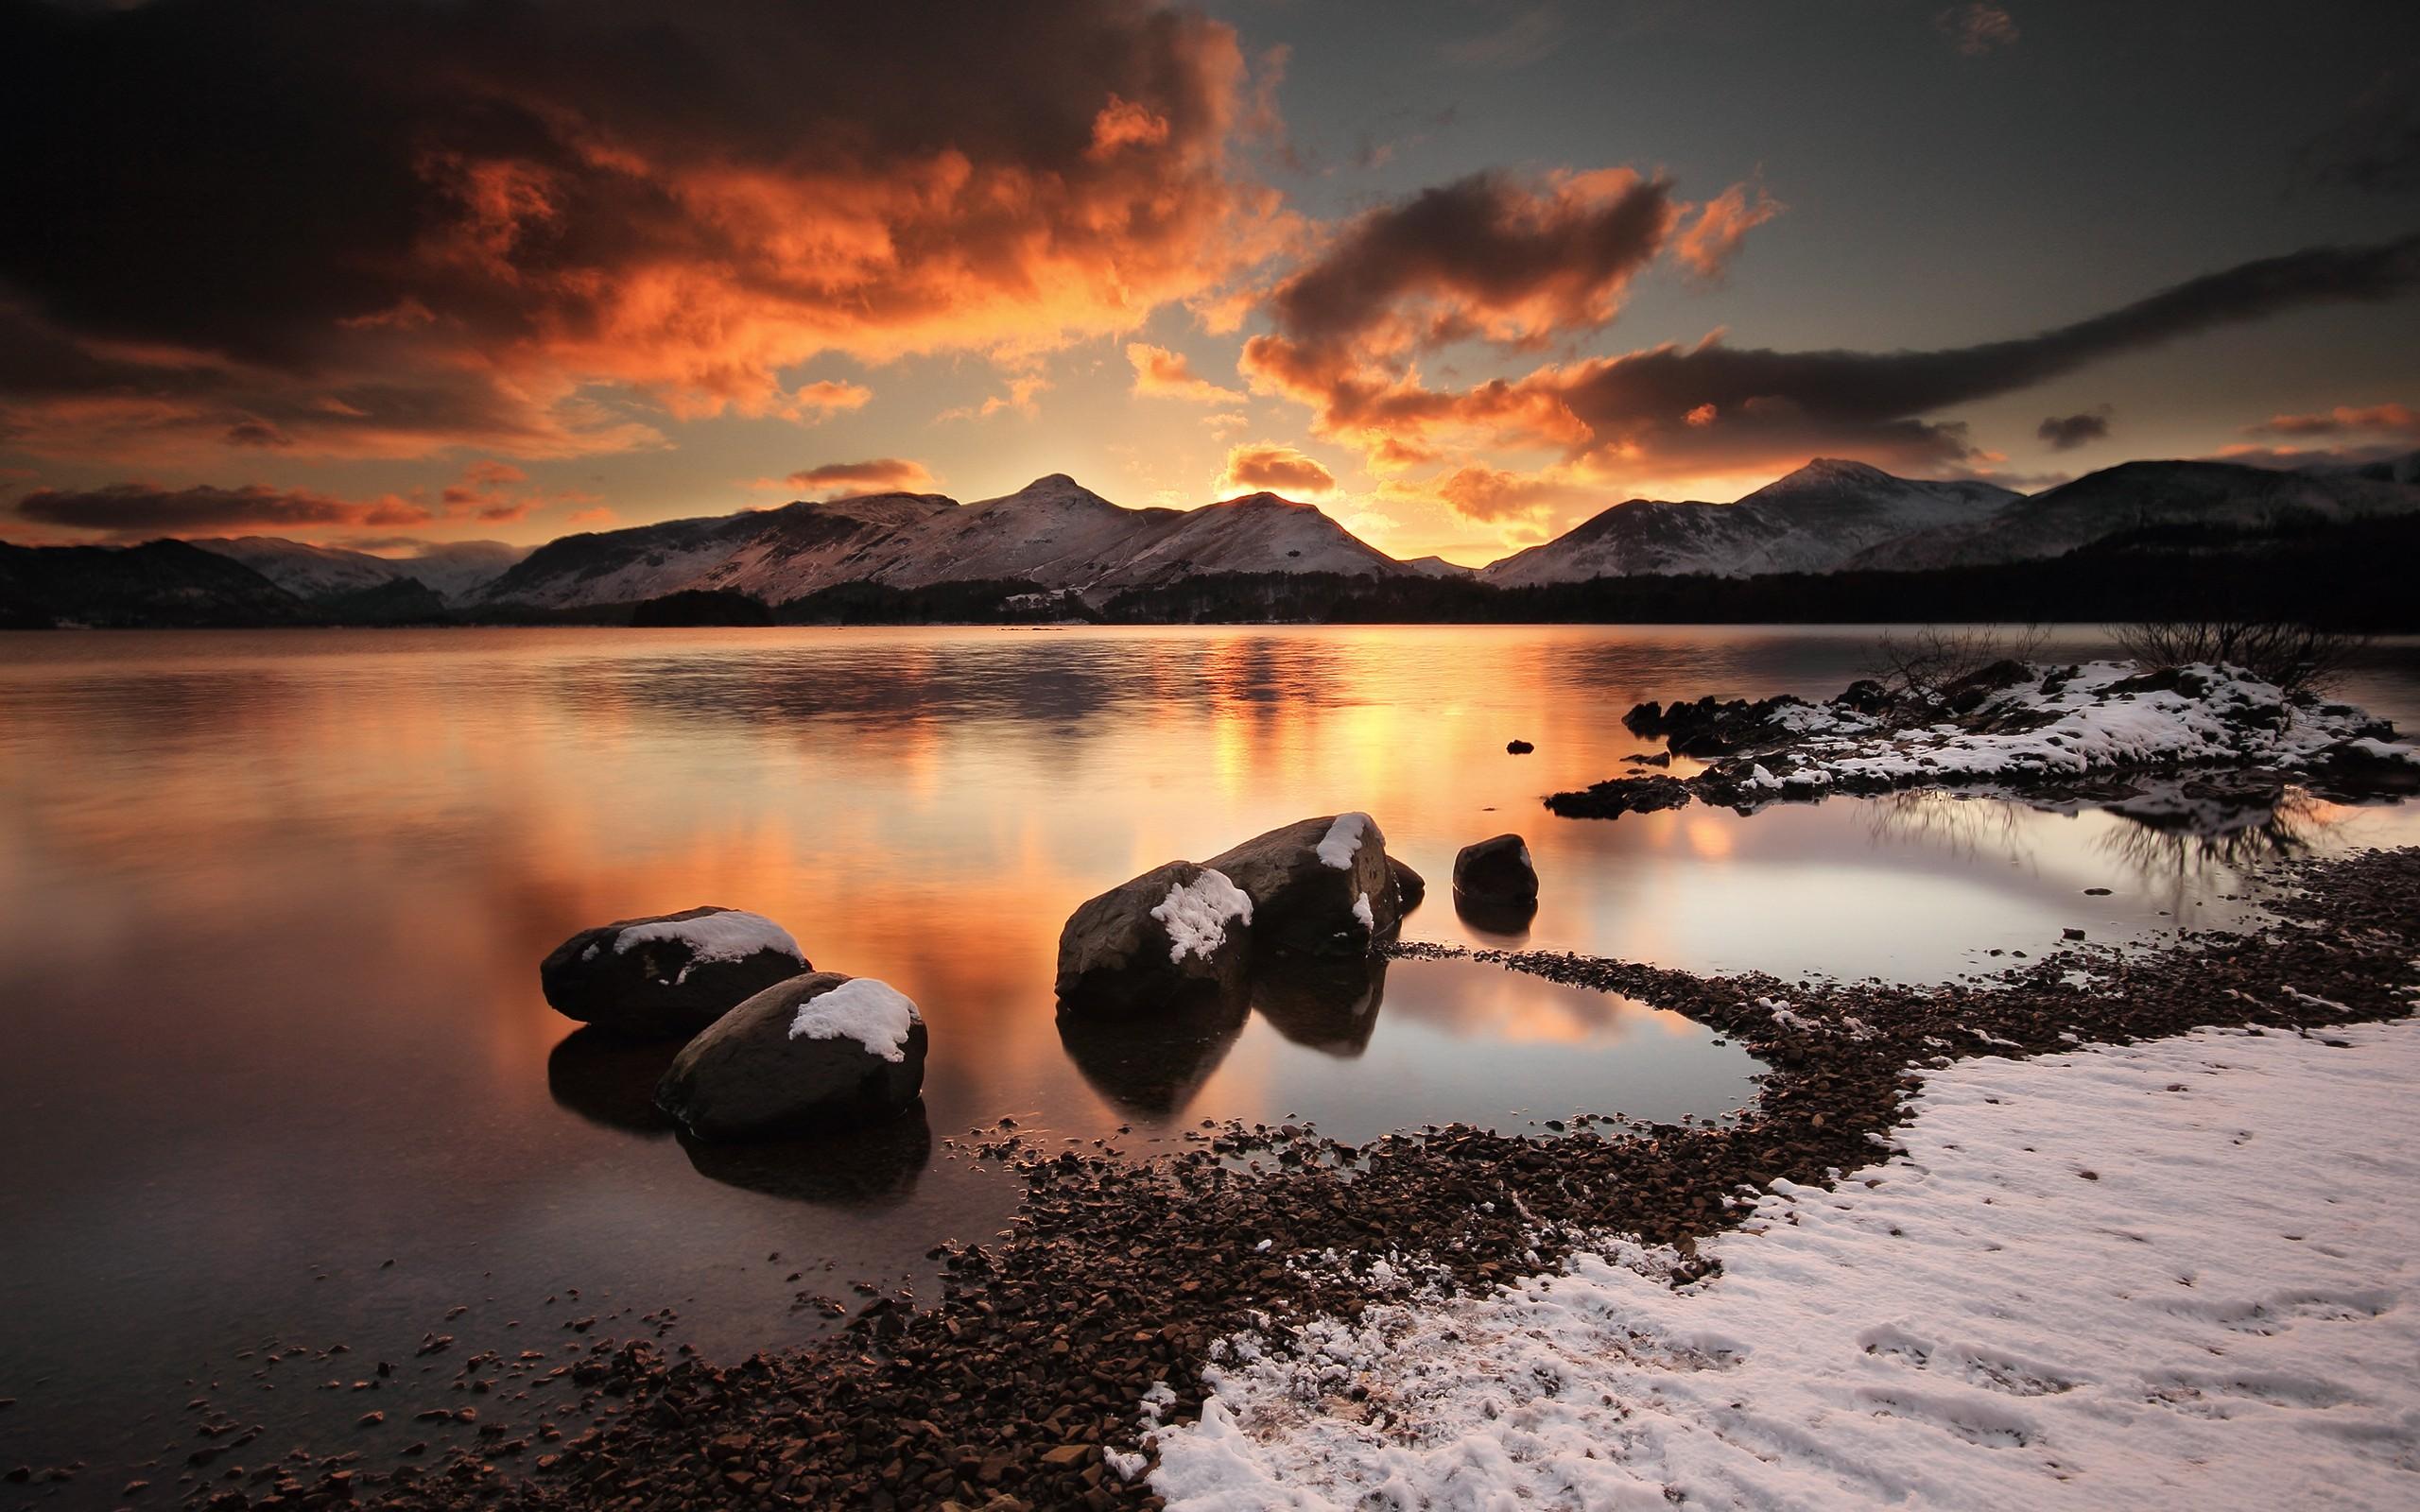 water, Sunset, Mountains, Clouds, Landscapes, Nature, Winter, Beach